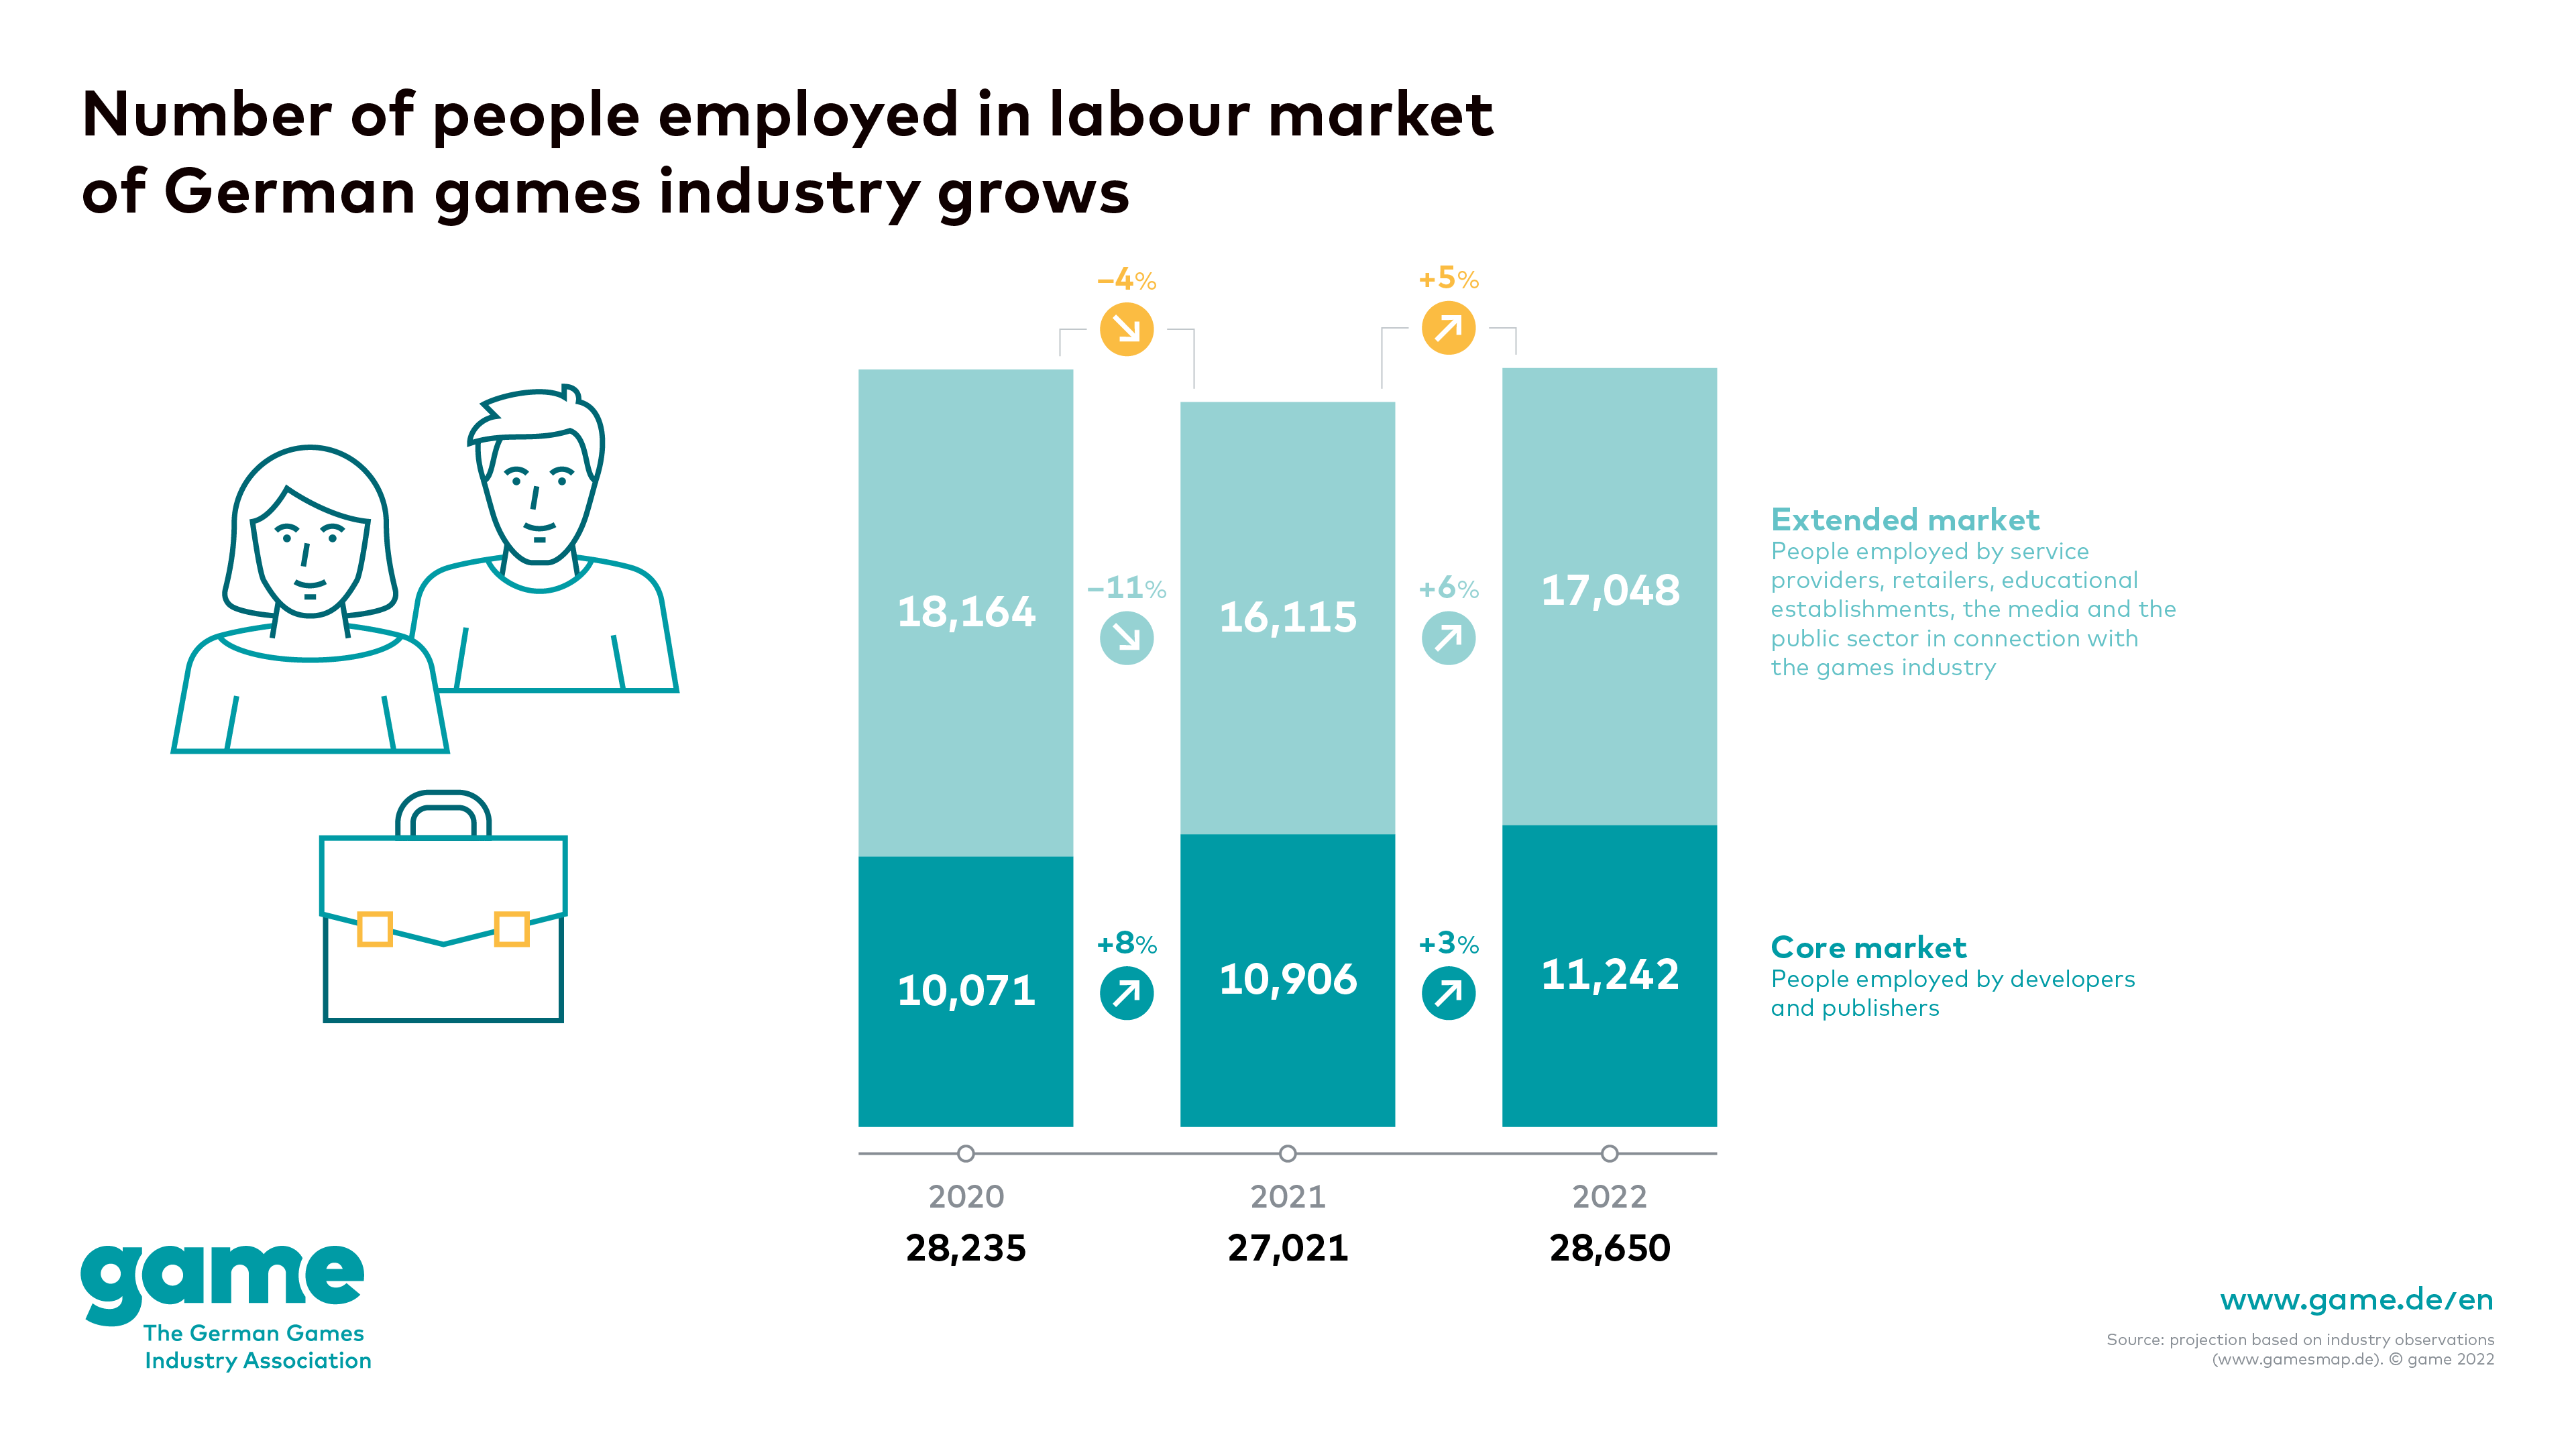 Number of people employed in labour market of German games industry grows